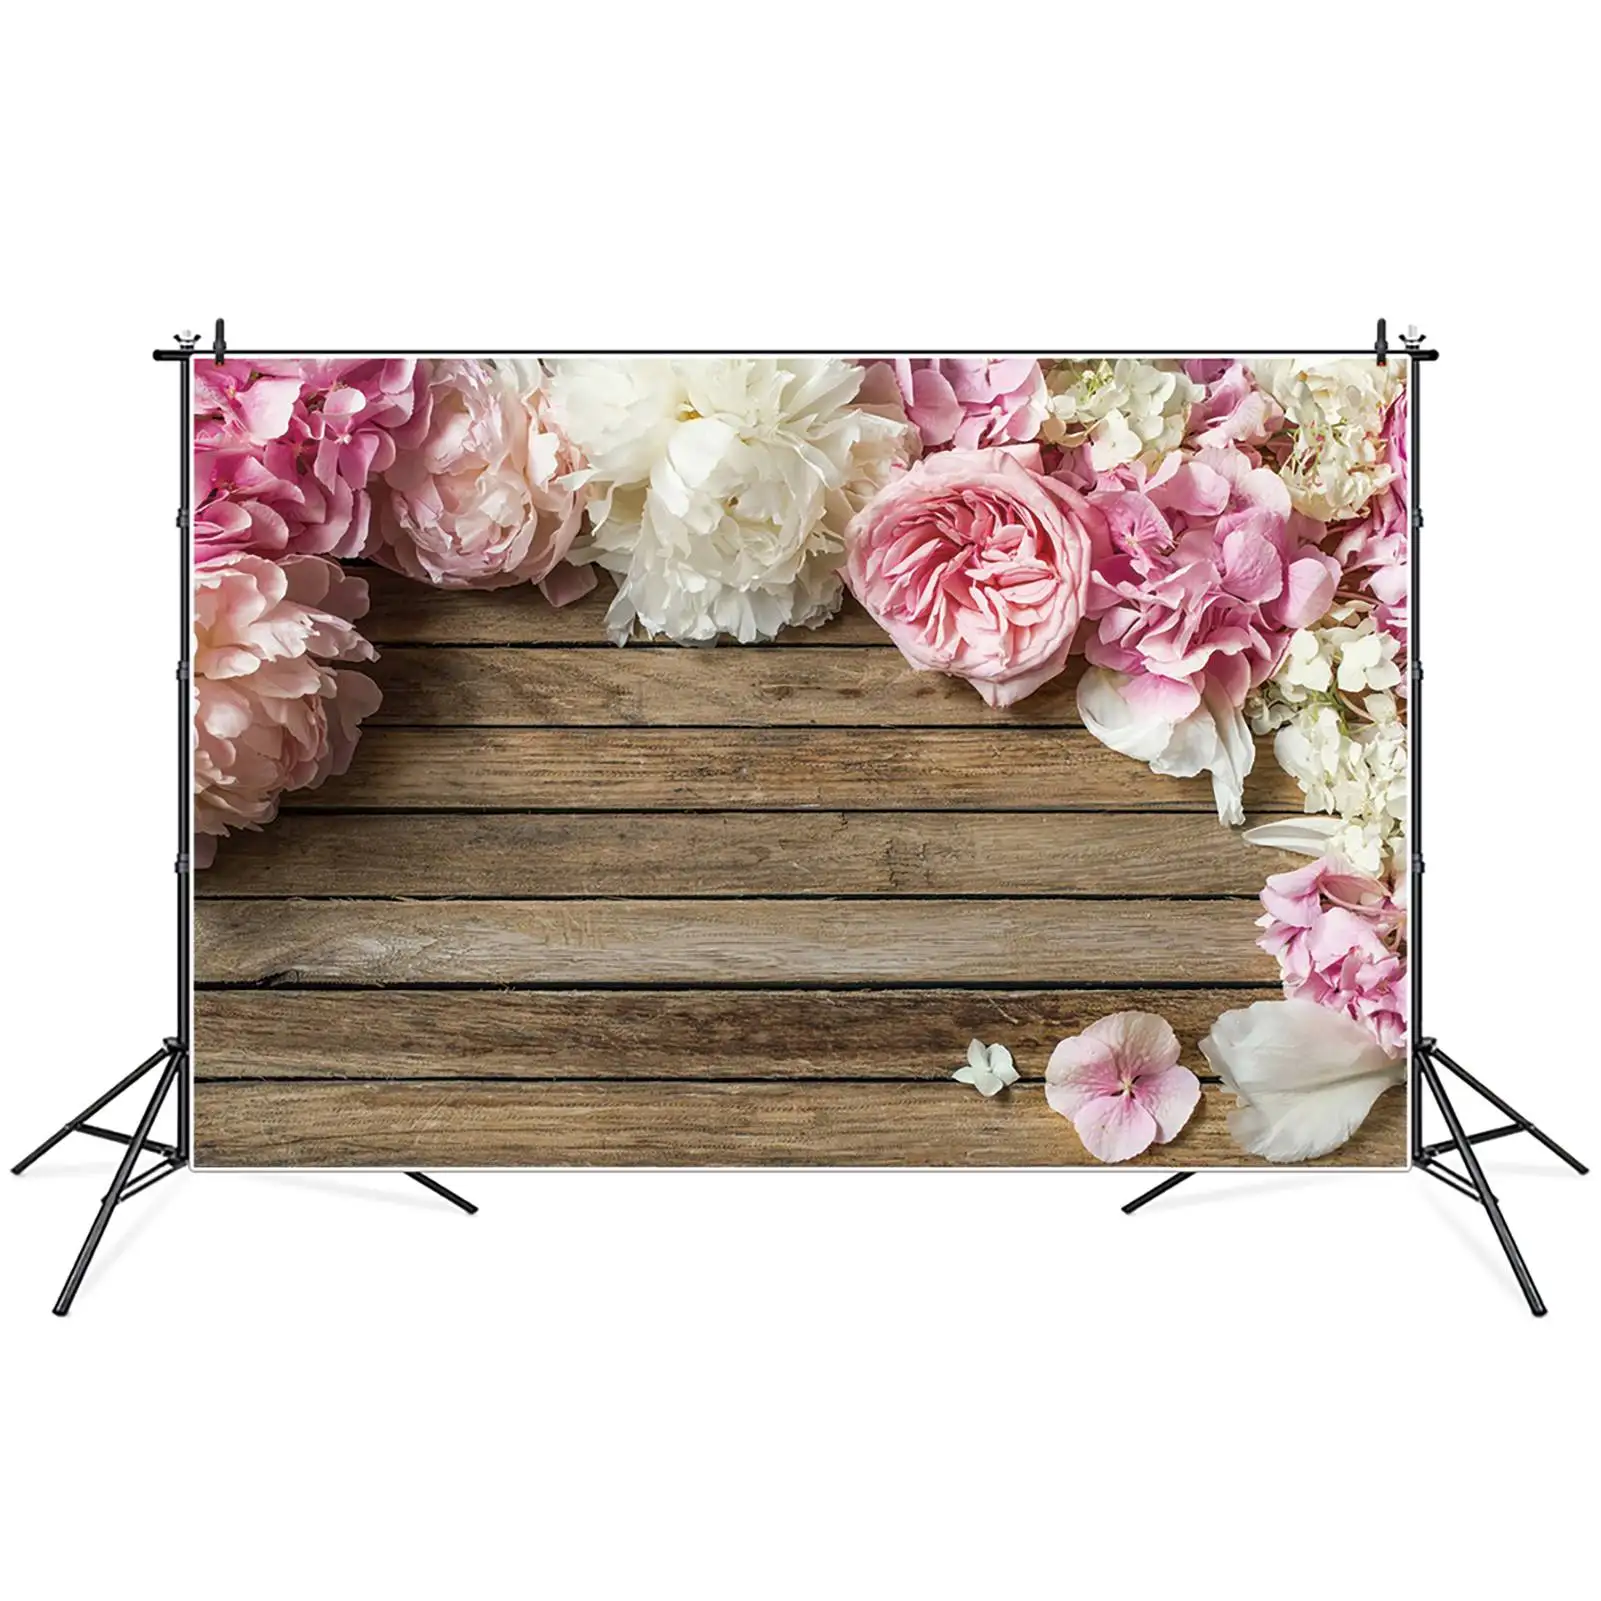 

Spring Flowers Wooden Board Backdrops Photography Pink White Floral Old Plank Personalized Baby Photobooth Photo Background